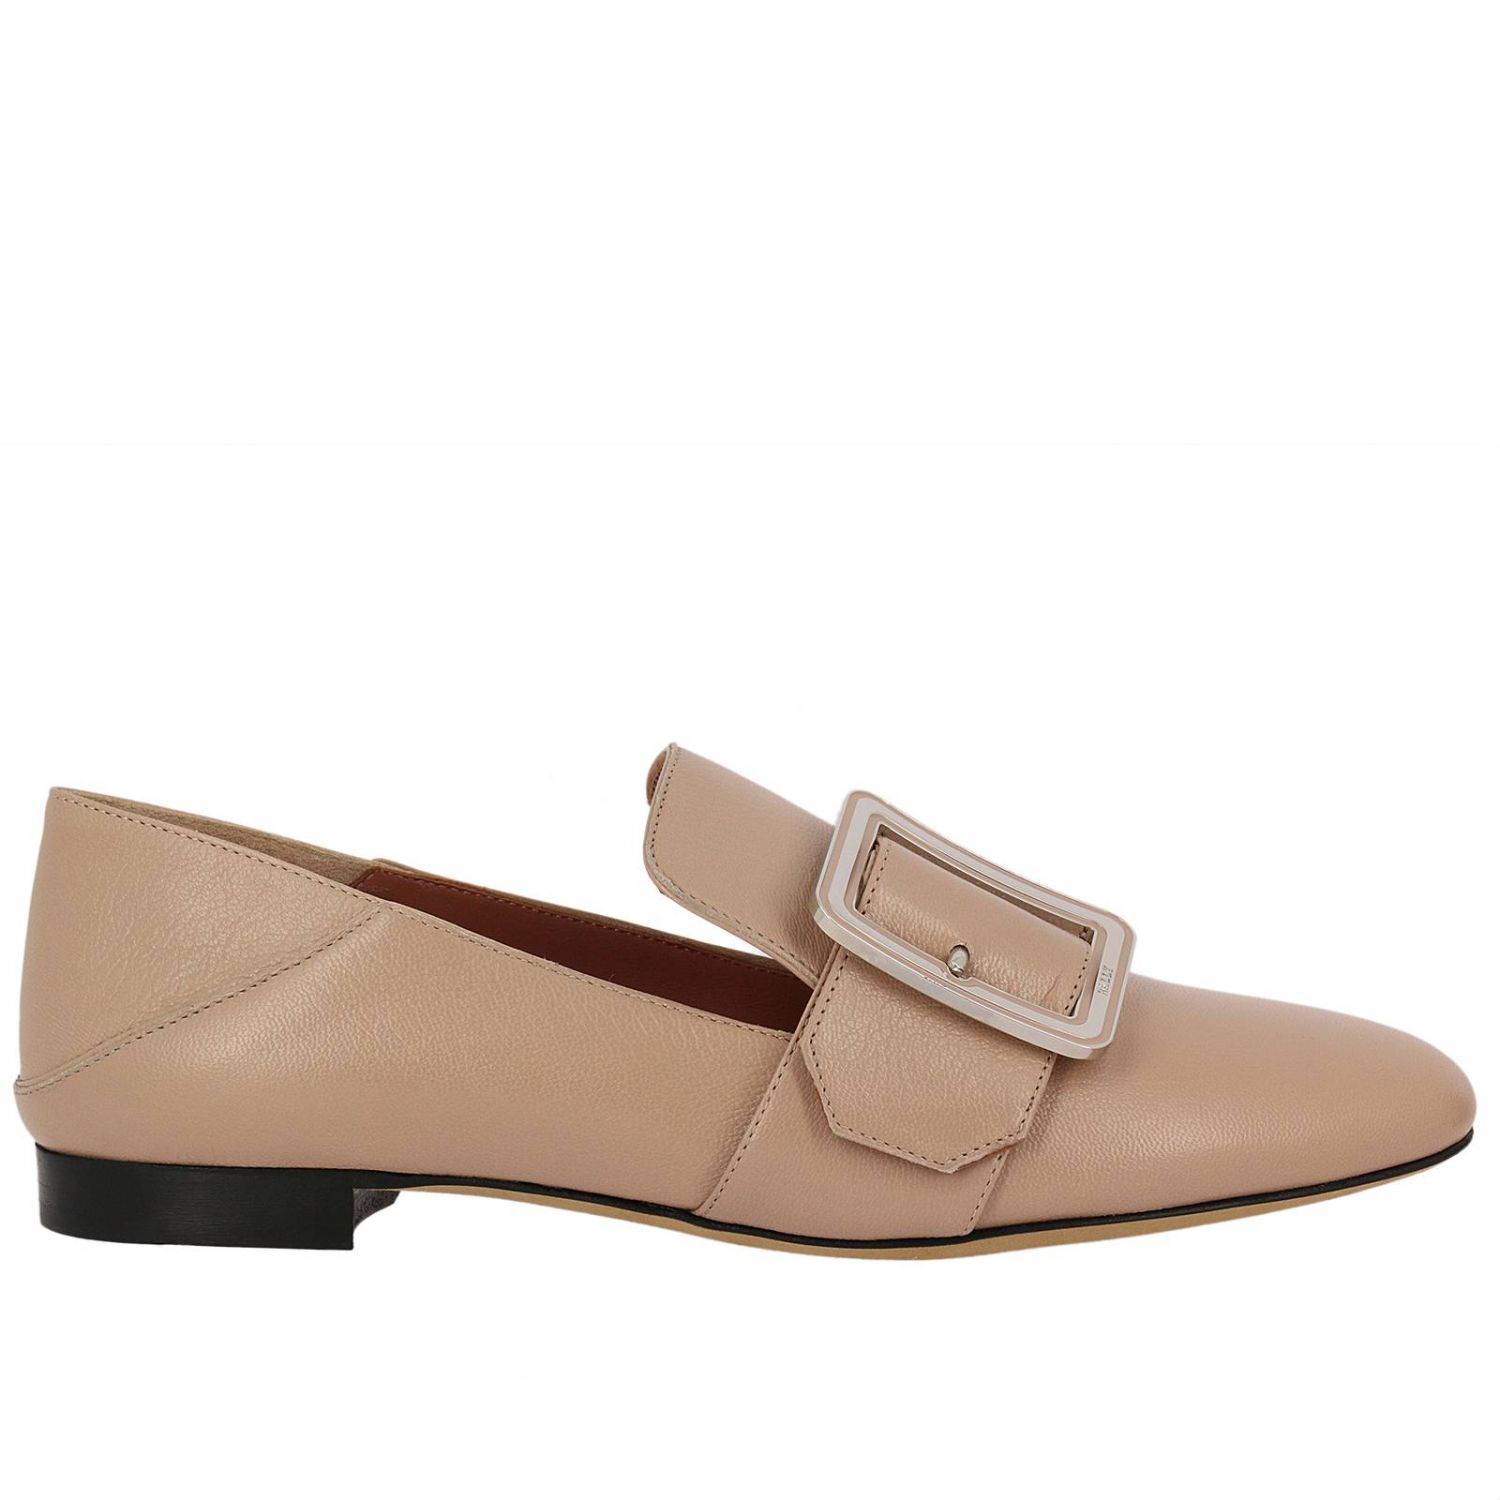 Bally Outlet: Shoes women - Beige | Ballet Flats Bally 6217681 GIGLIO.COM